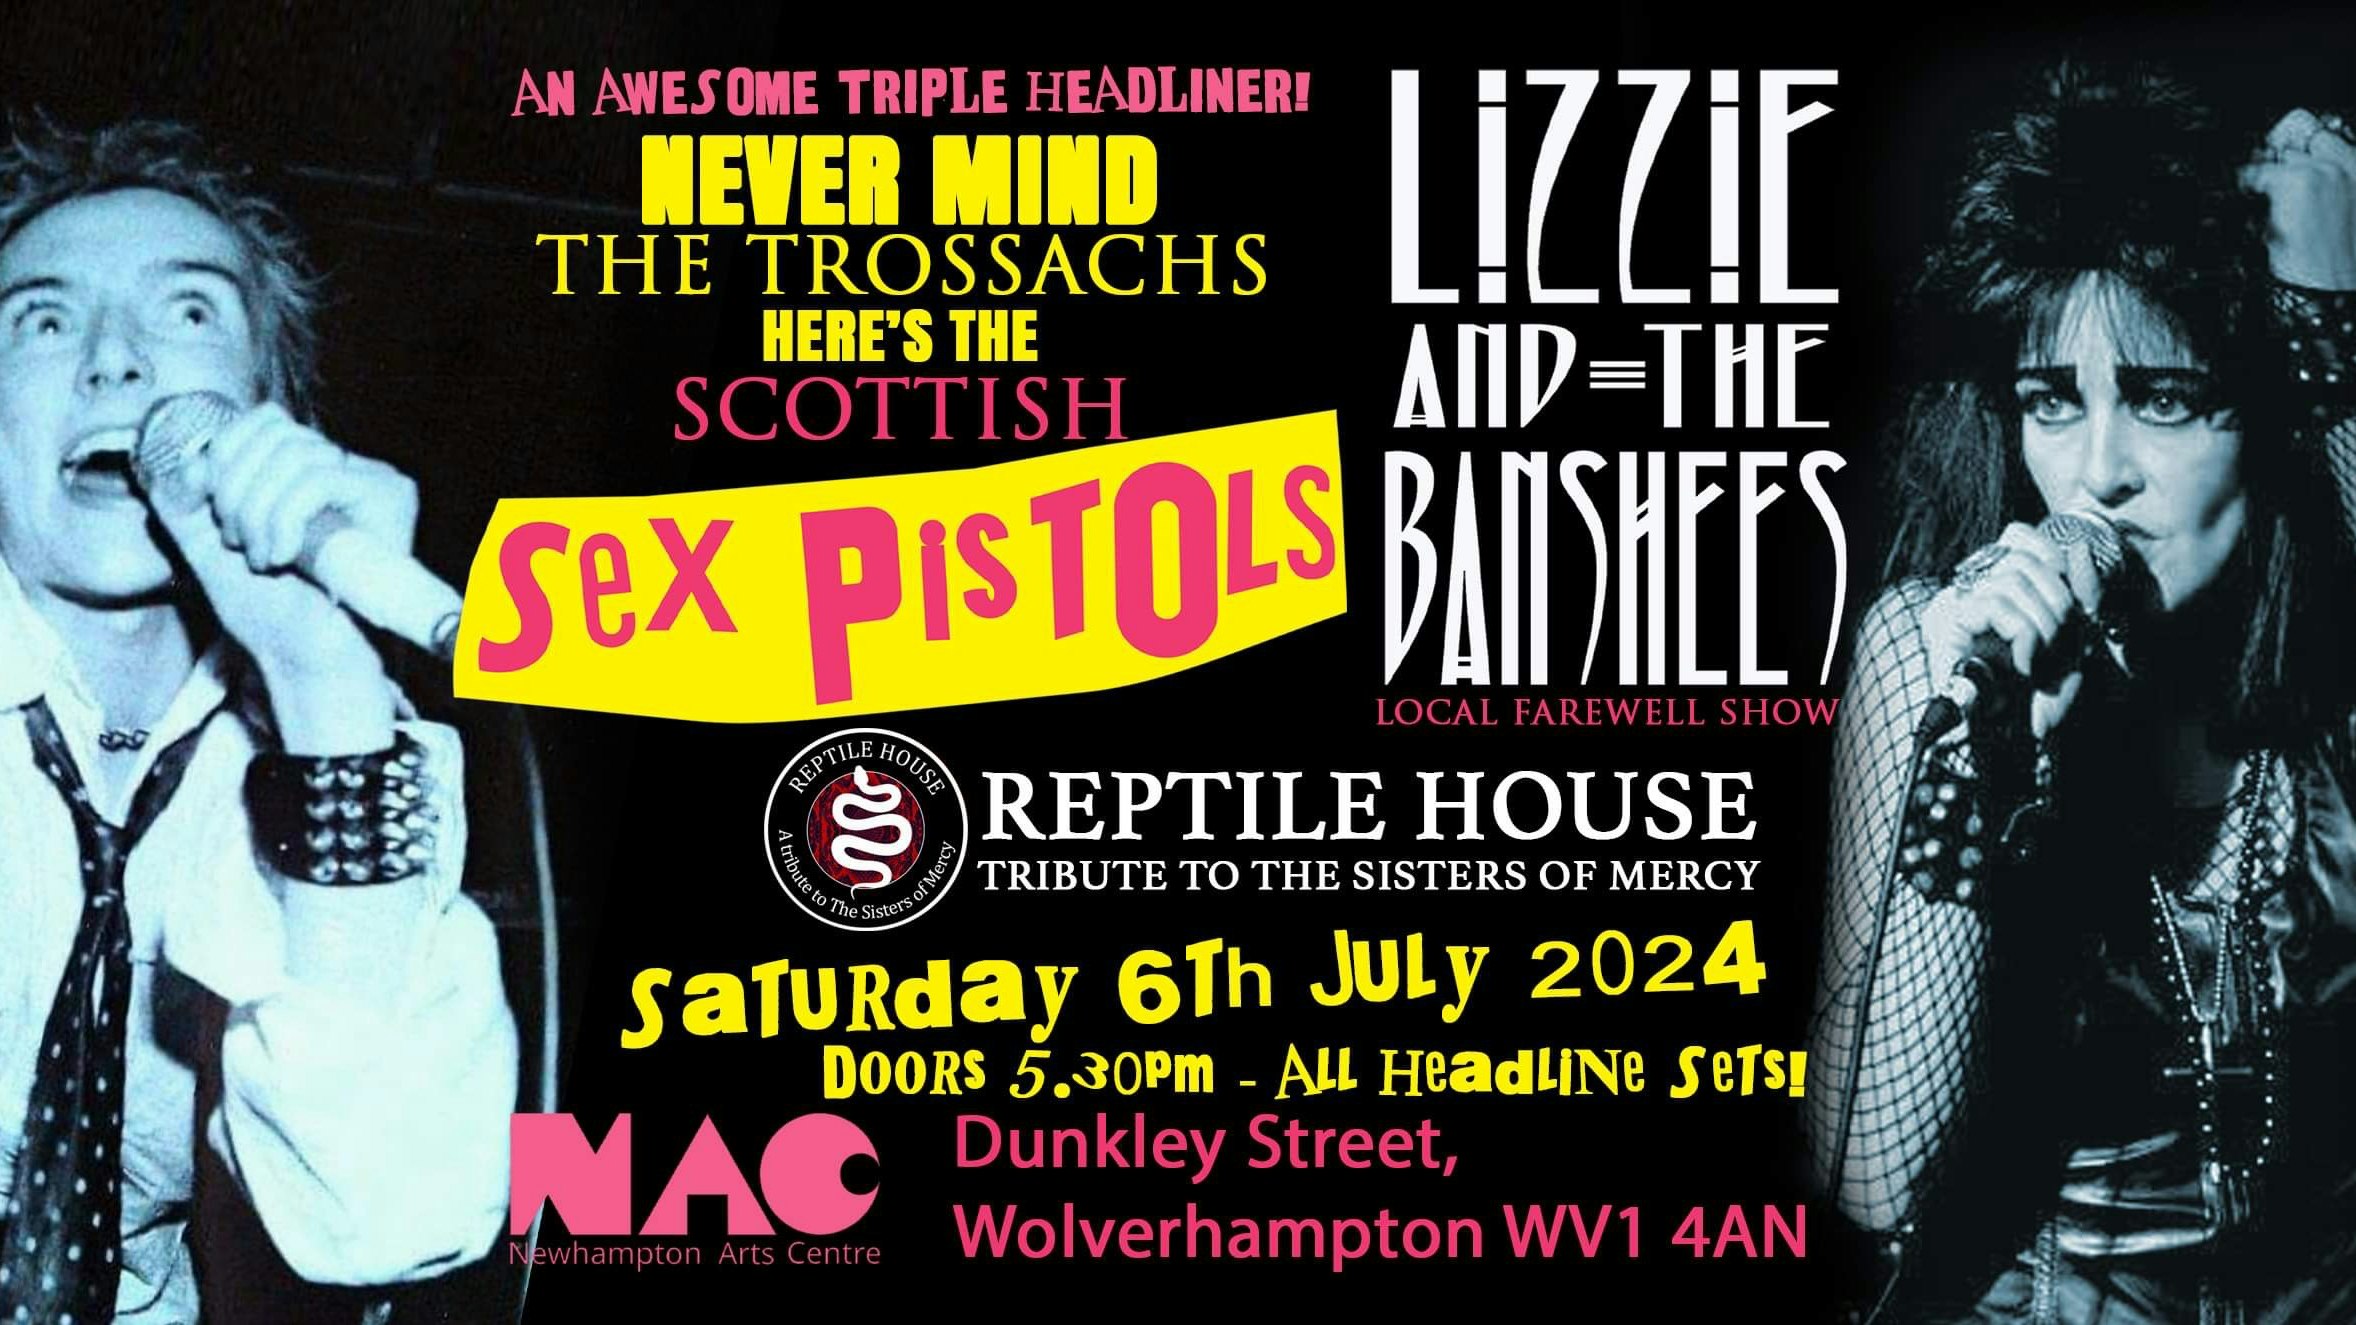 AN AWESOME TRIPLE HEADLINER! – THE SCOTTISH SEX PISTOLS + LIZZIE & THE BANSHEES & REPTILE HOUSE (Sisters Of Mercy Tribute)